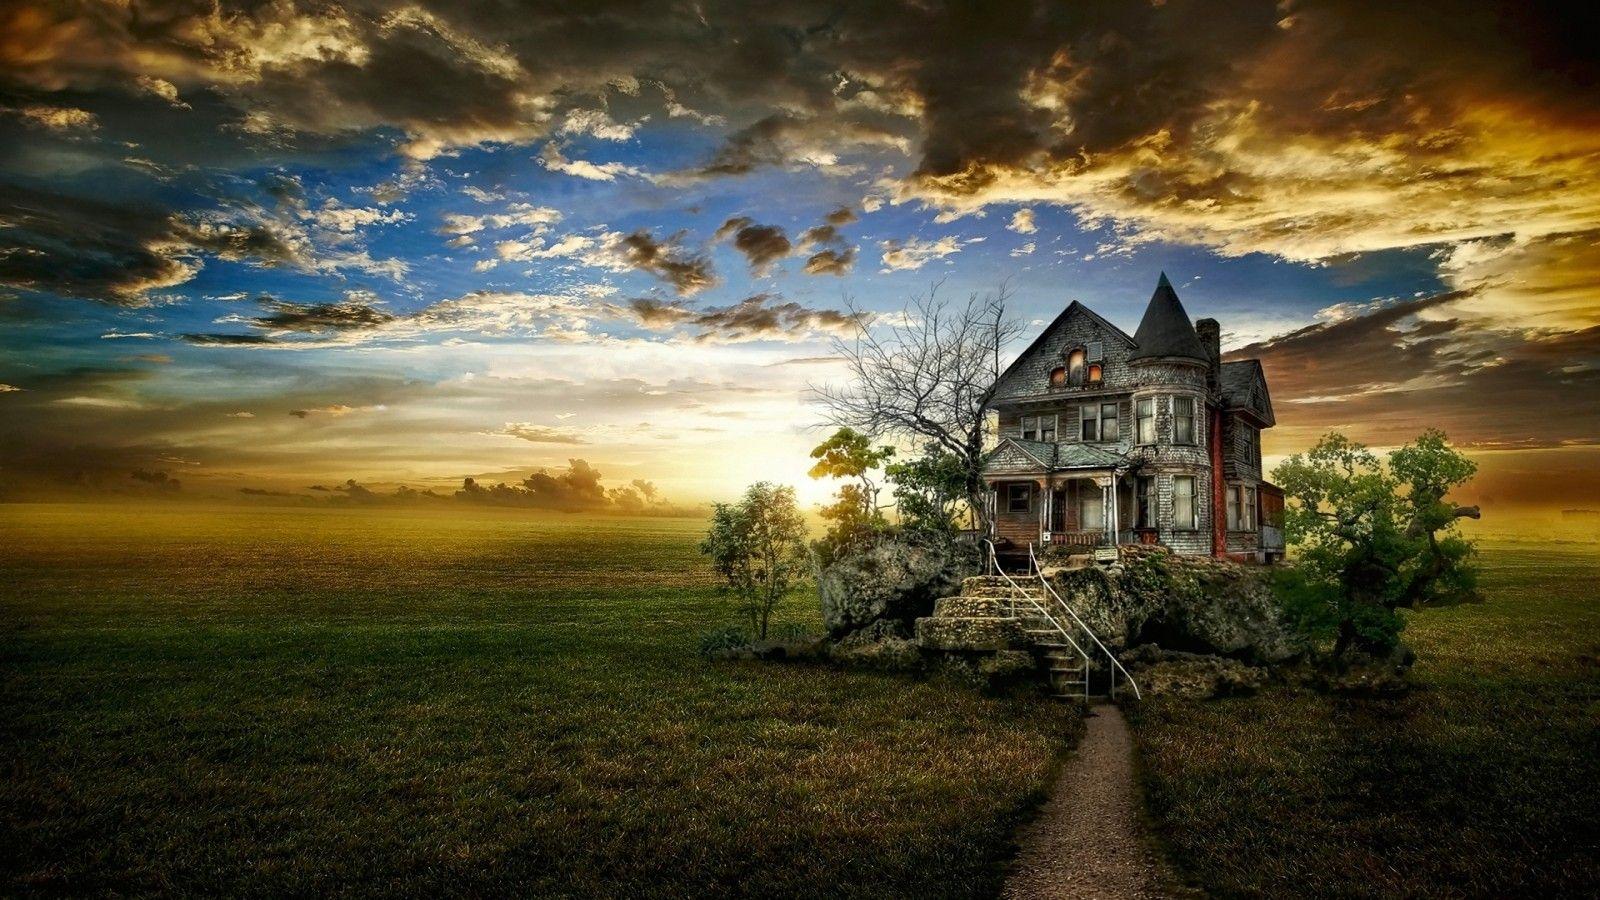 Houses: Haunted House Stretched Halloween Clouds Sky Nature